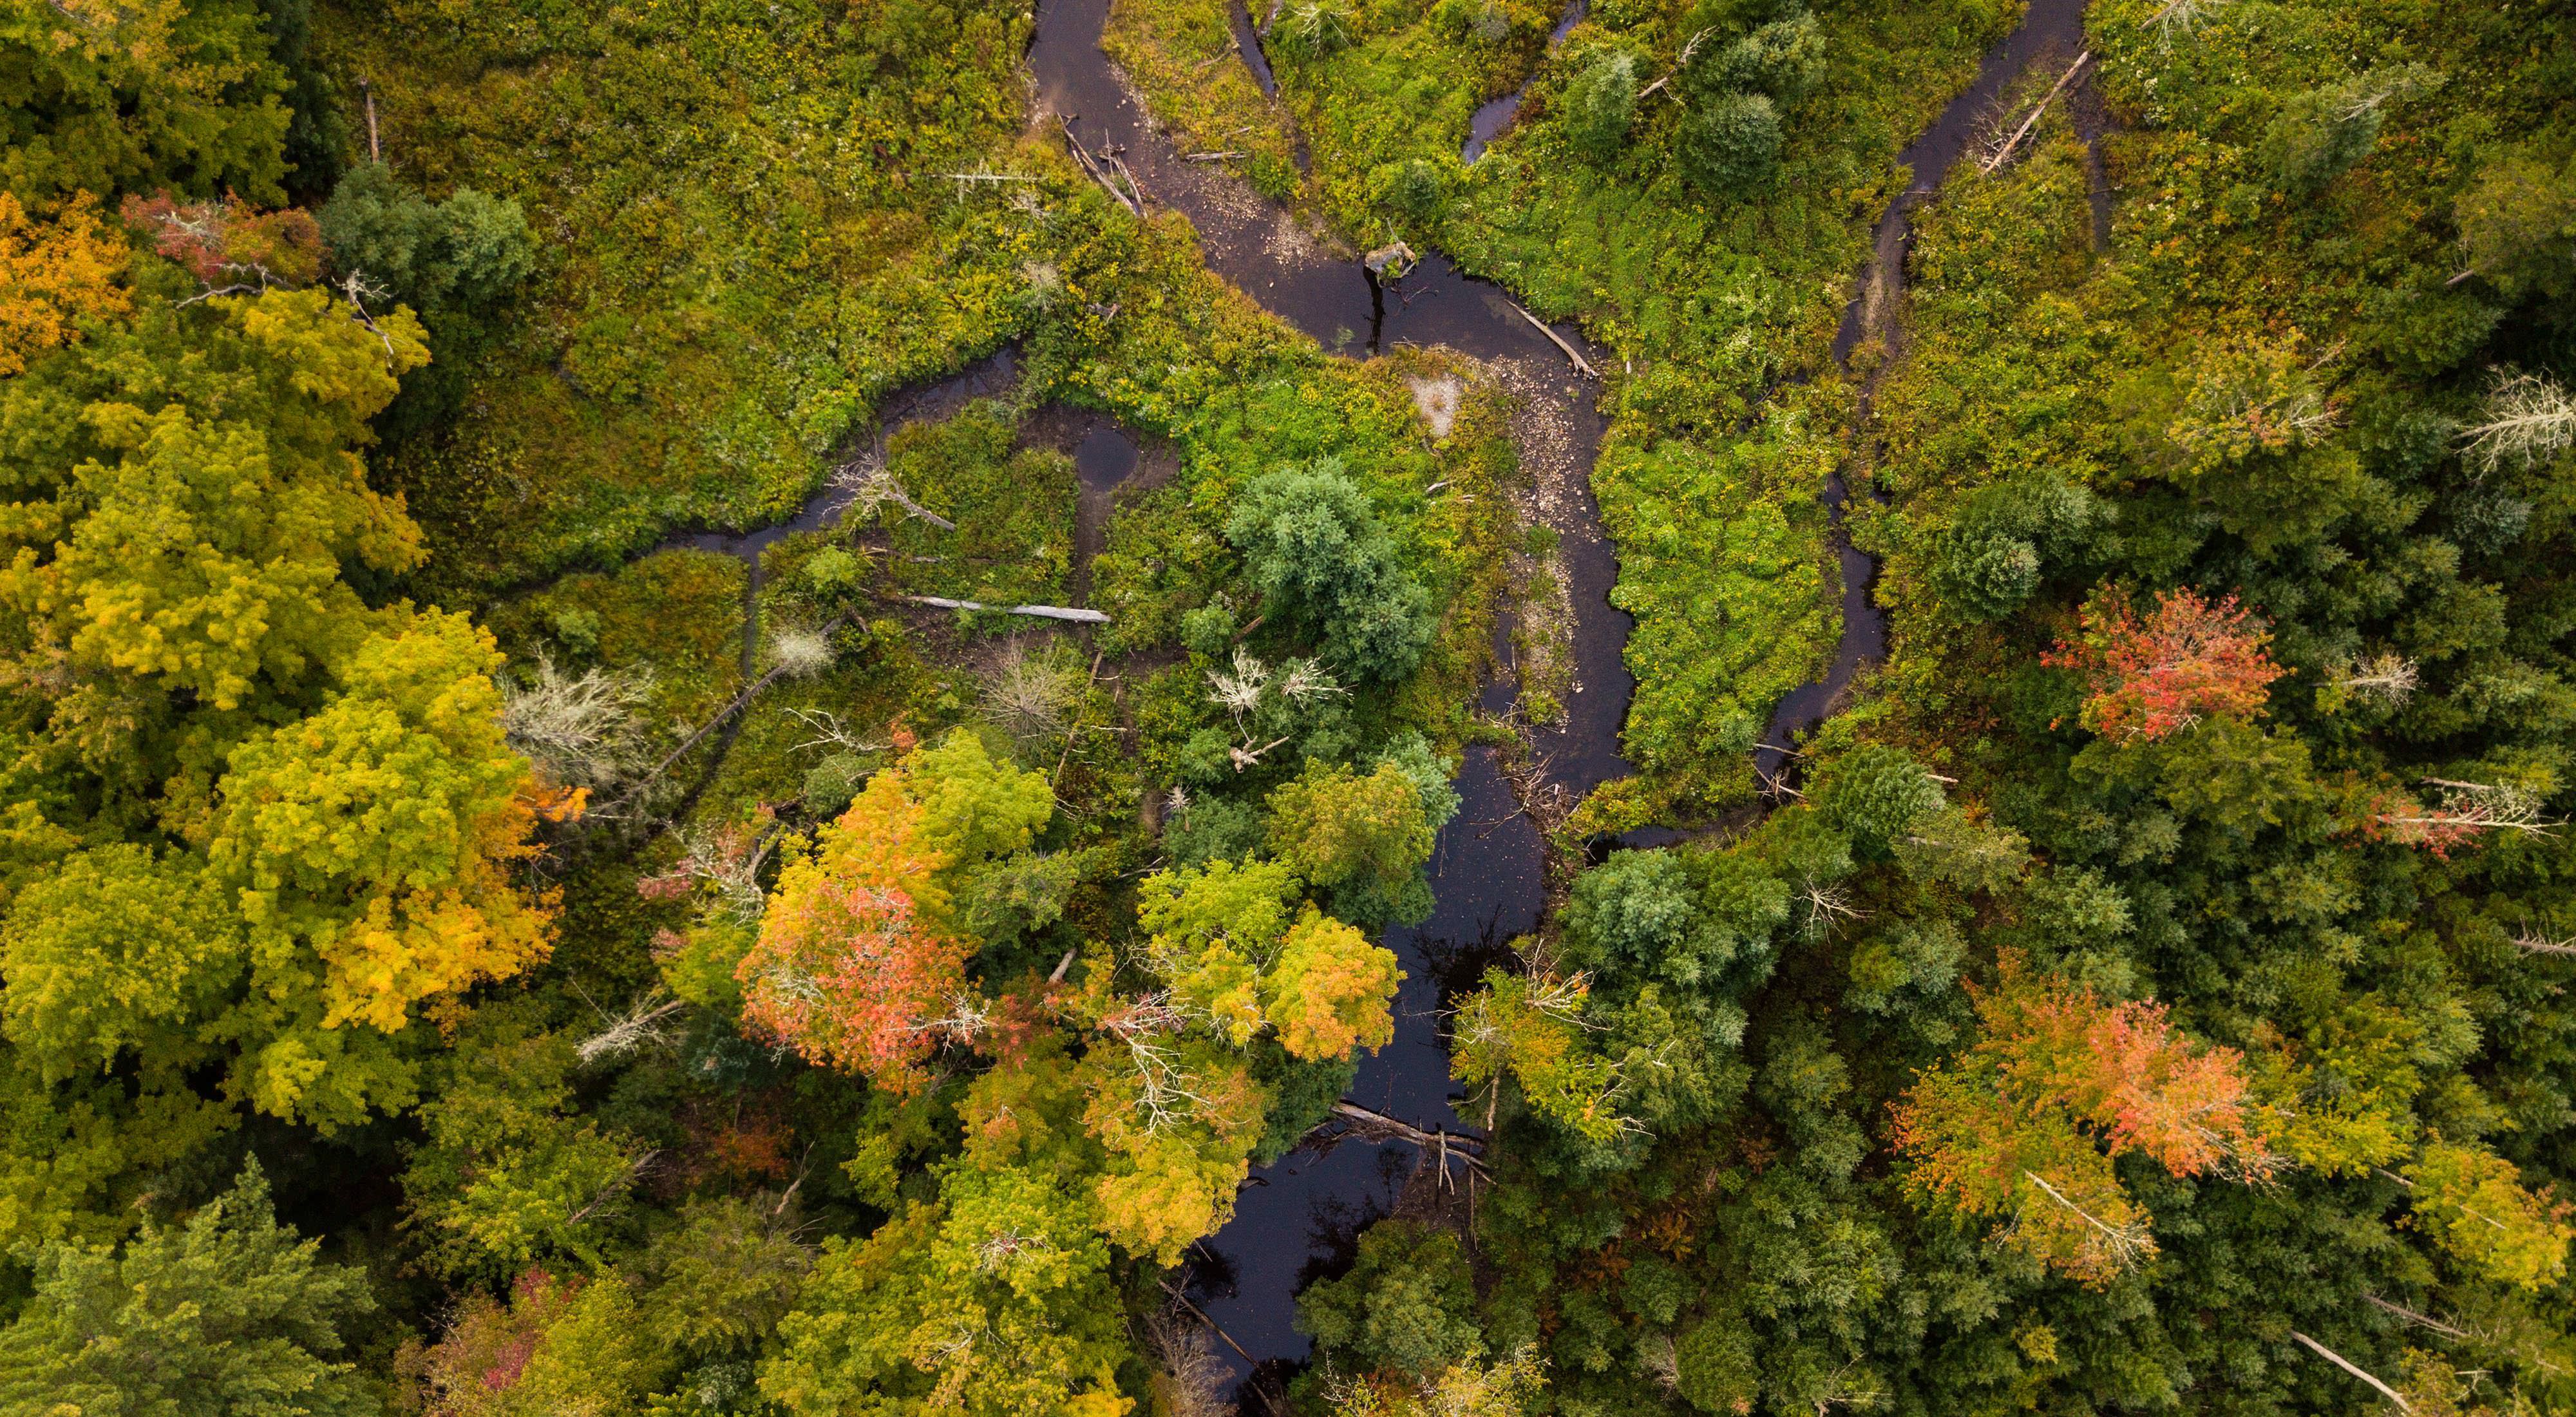 Aerial of the Cockermouth River in Groton, NH looking down on the river meandering through an autumn-colored forest.